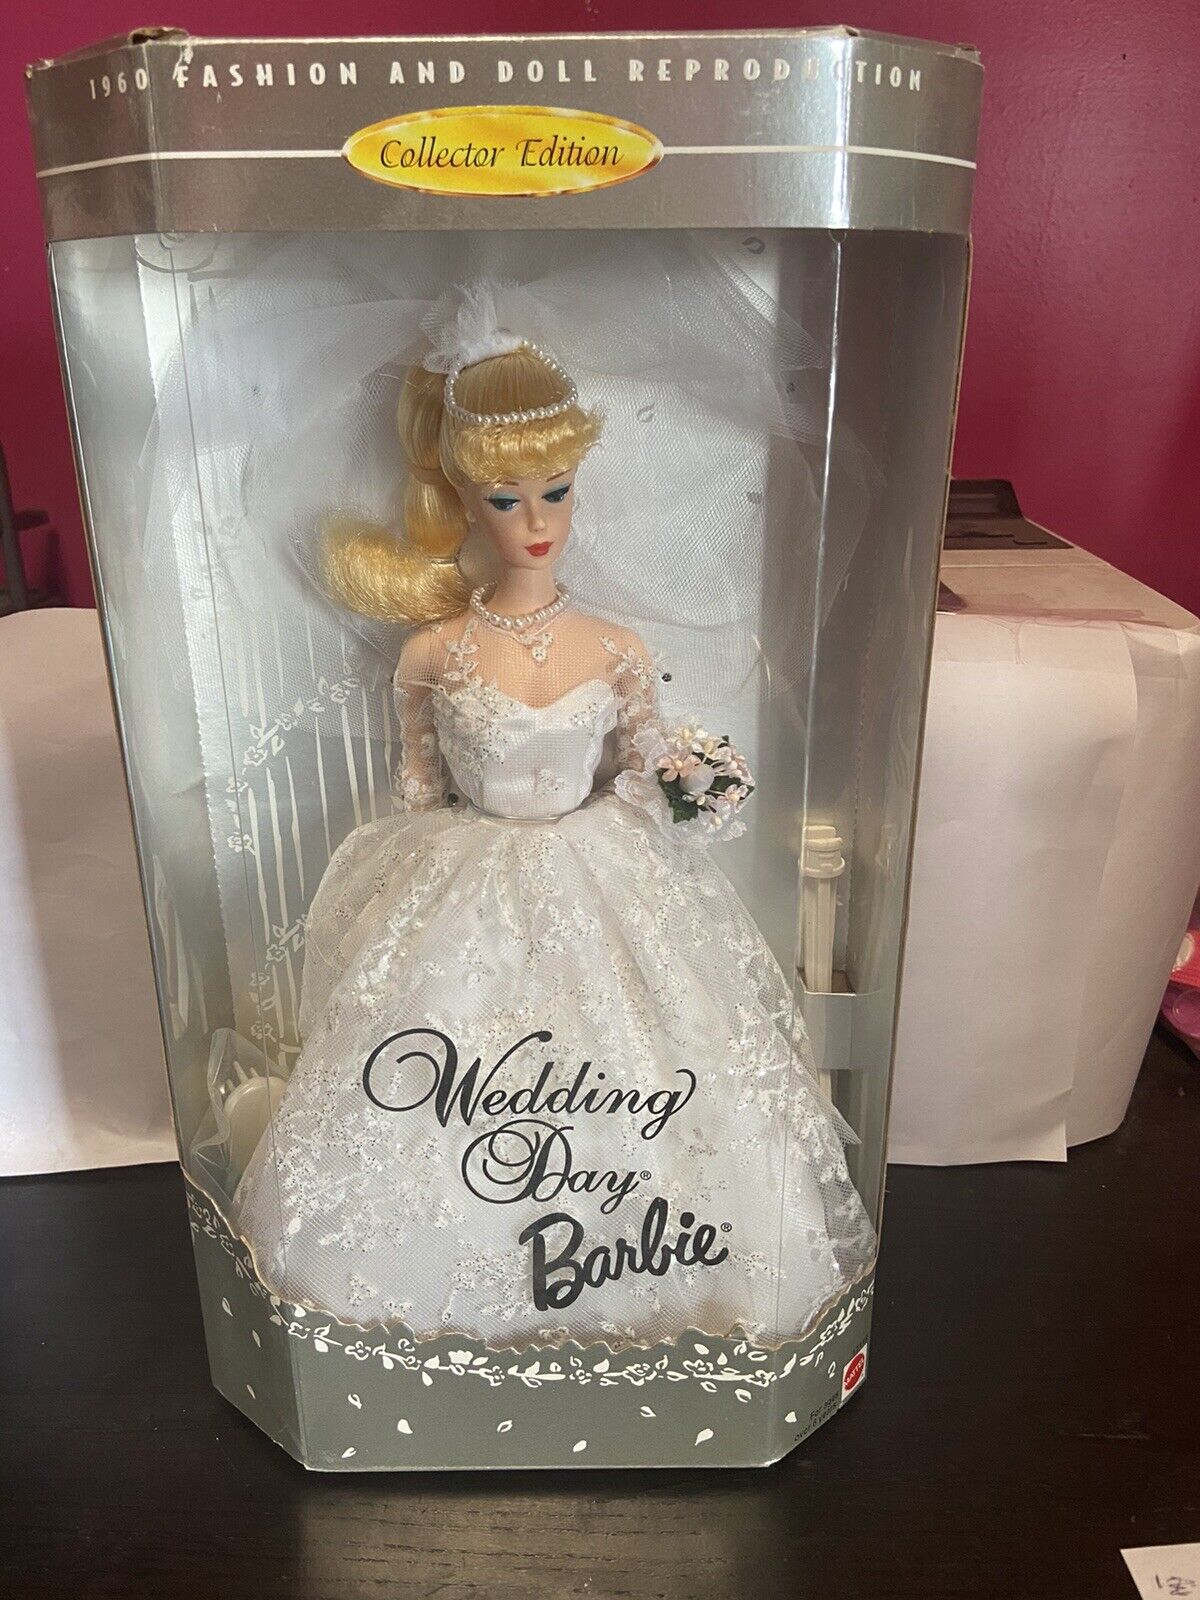 1996 Wedding Day Barbie Doll Collector Edition Vintage Mattel New in Box Blonde